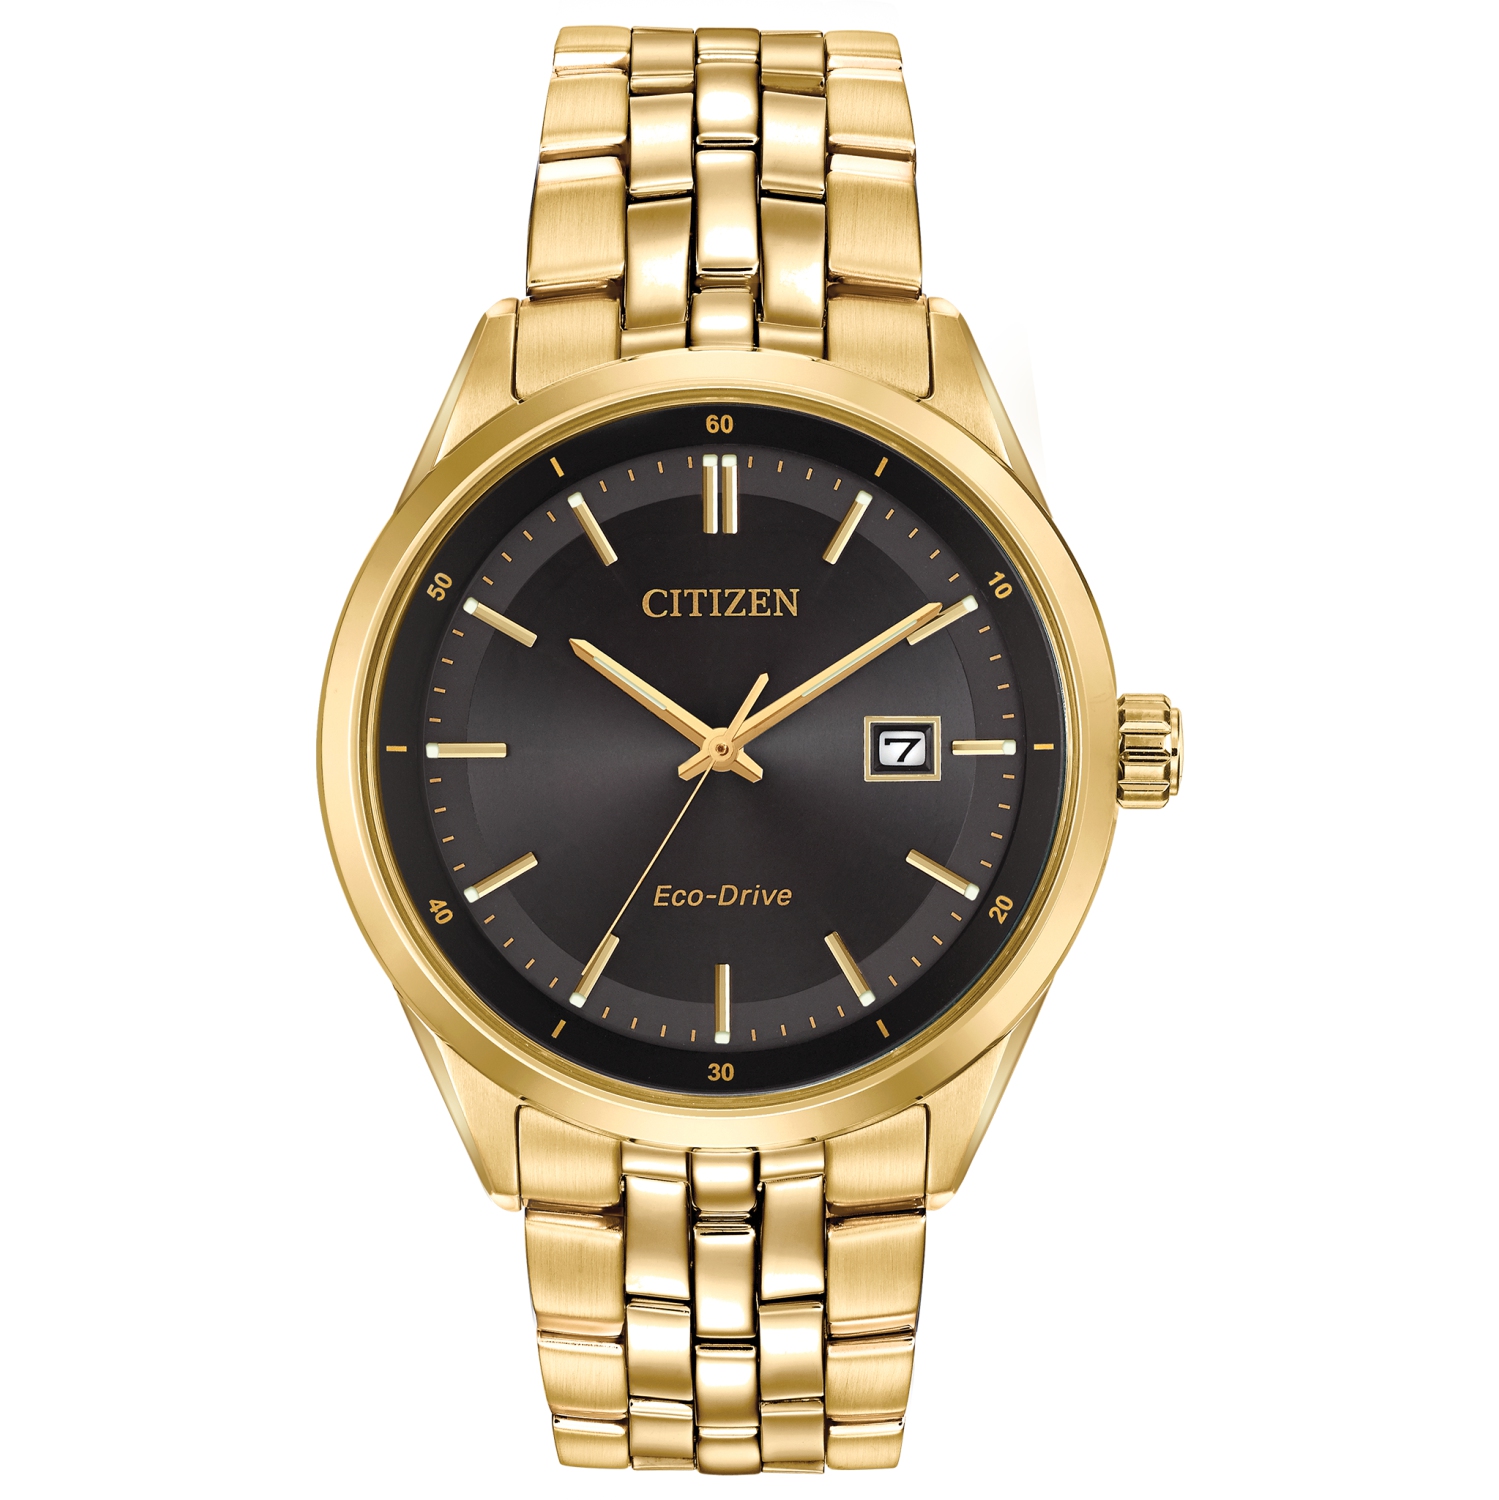 Citizen Mens Addysen Japanese Eco-Drive Watch 41mm Gold-Tone Stainless Steel Case and Bracelet with Black Dial (BM7252-51E)